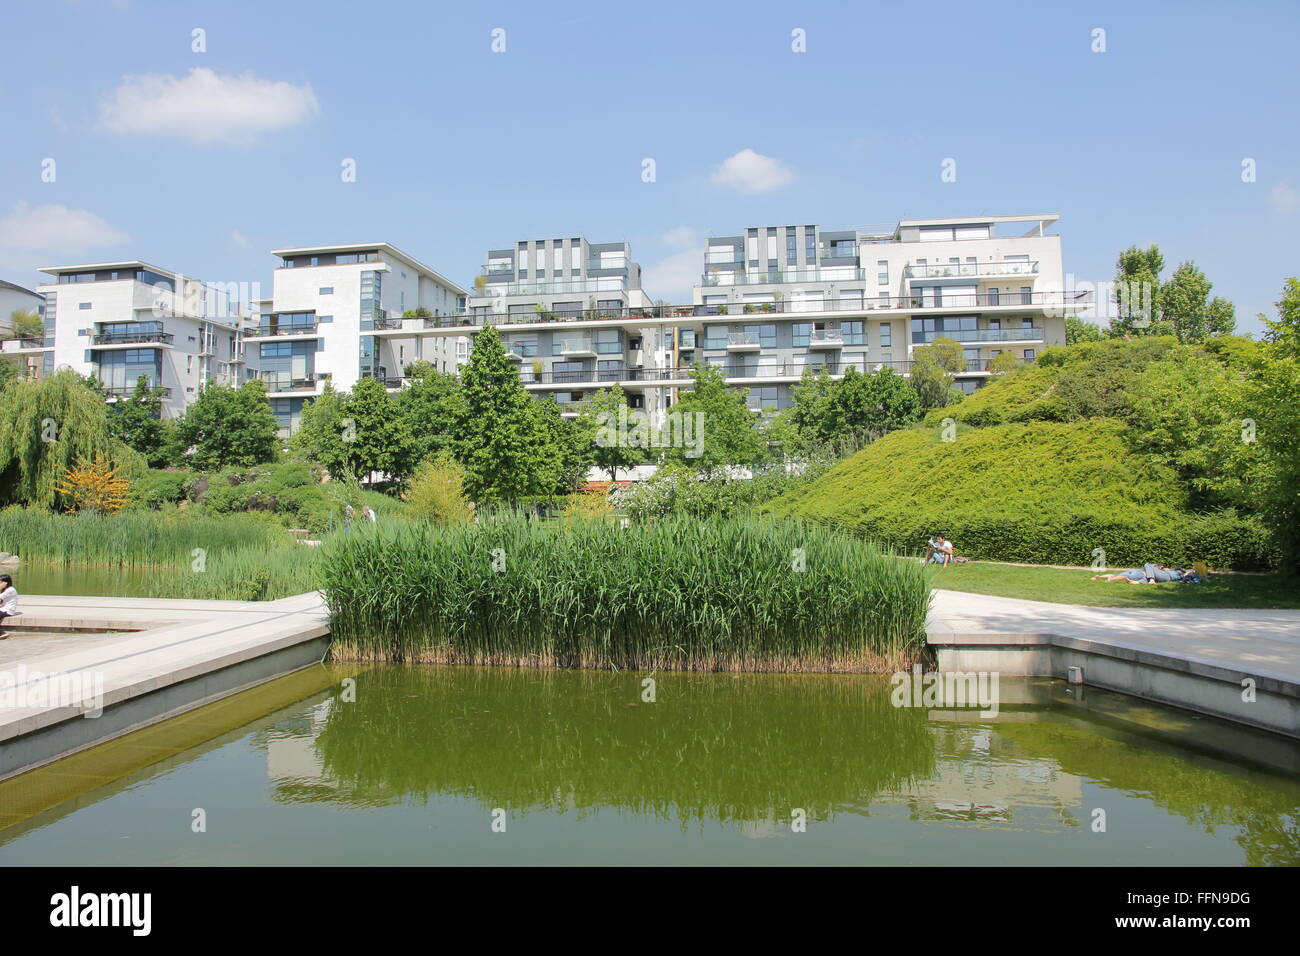 Geographie/reisen, Frankreich, Paris, Bercy, Parc de Bercy, Additional-Rights - Clearance-Info - Not-Available Stockfoto